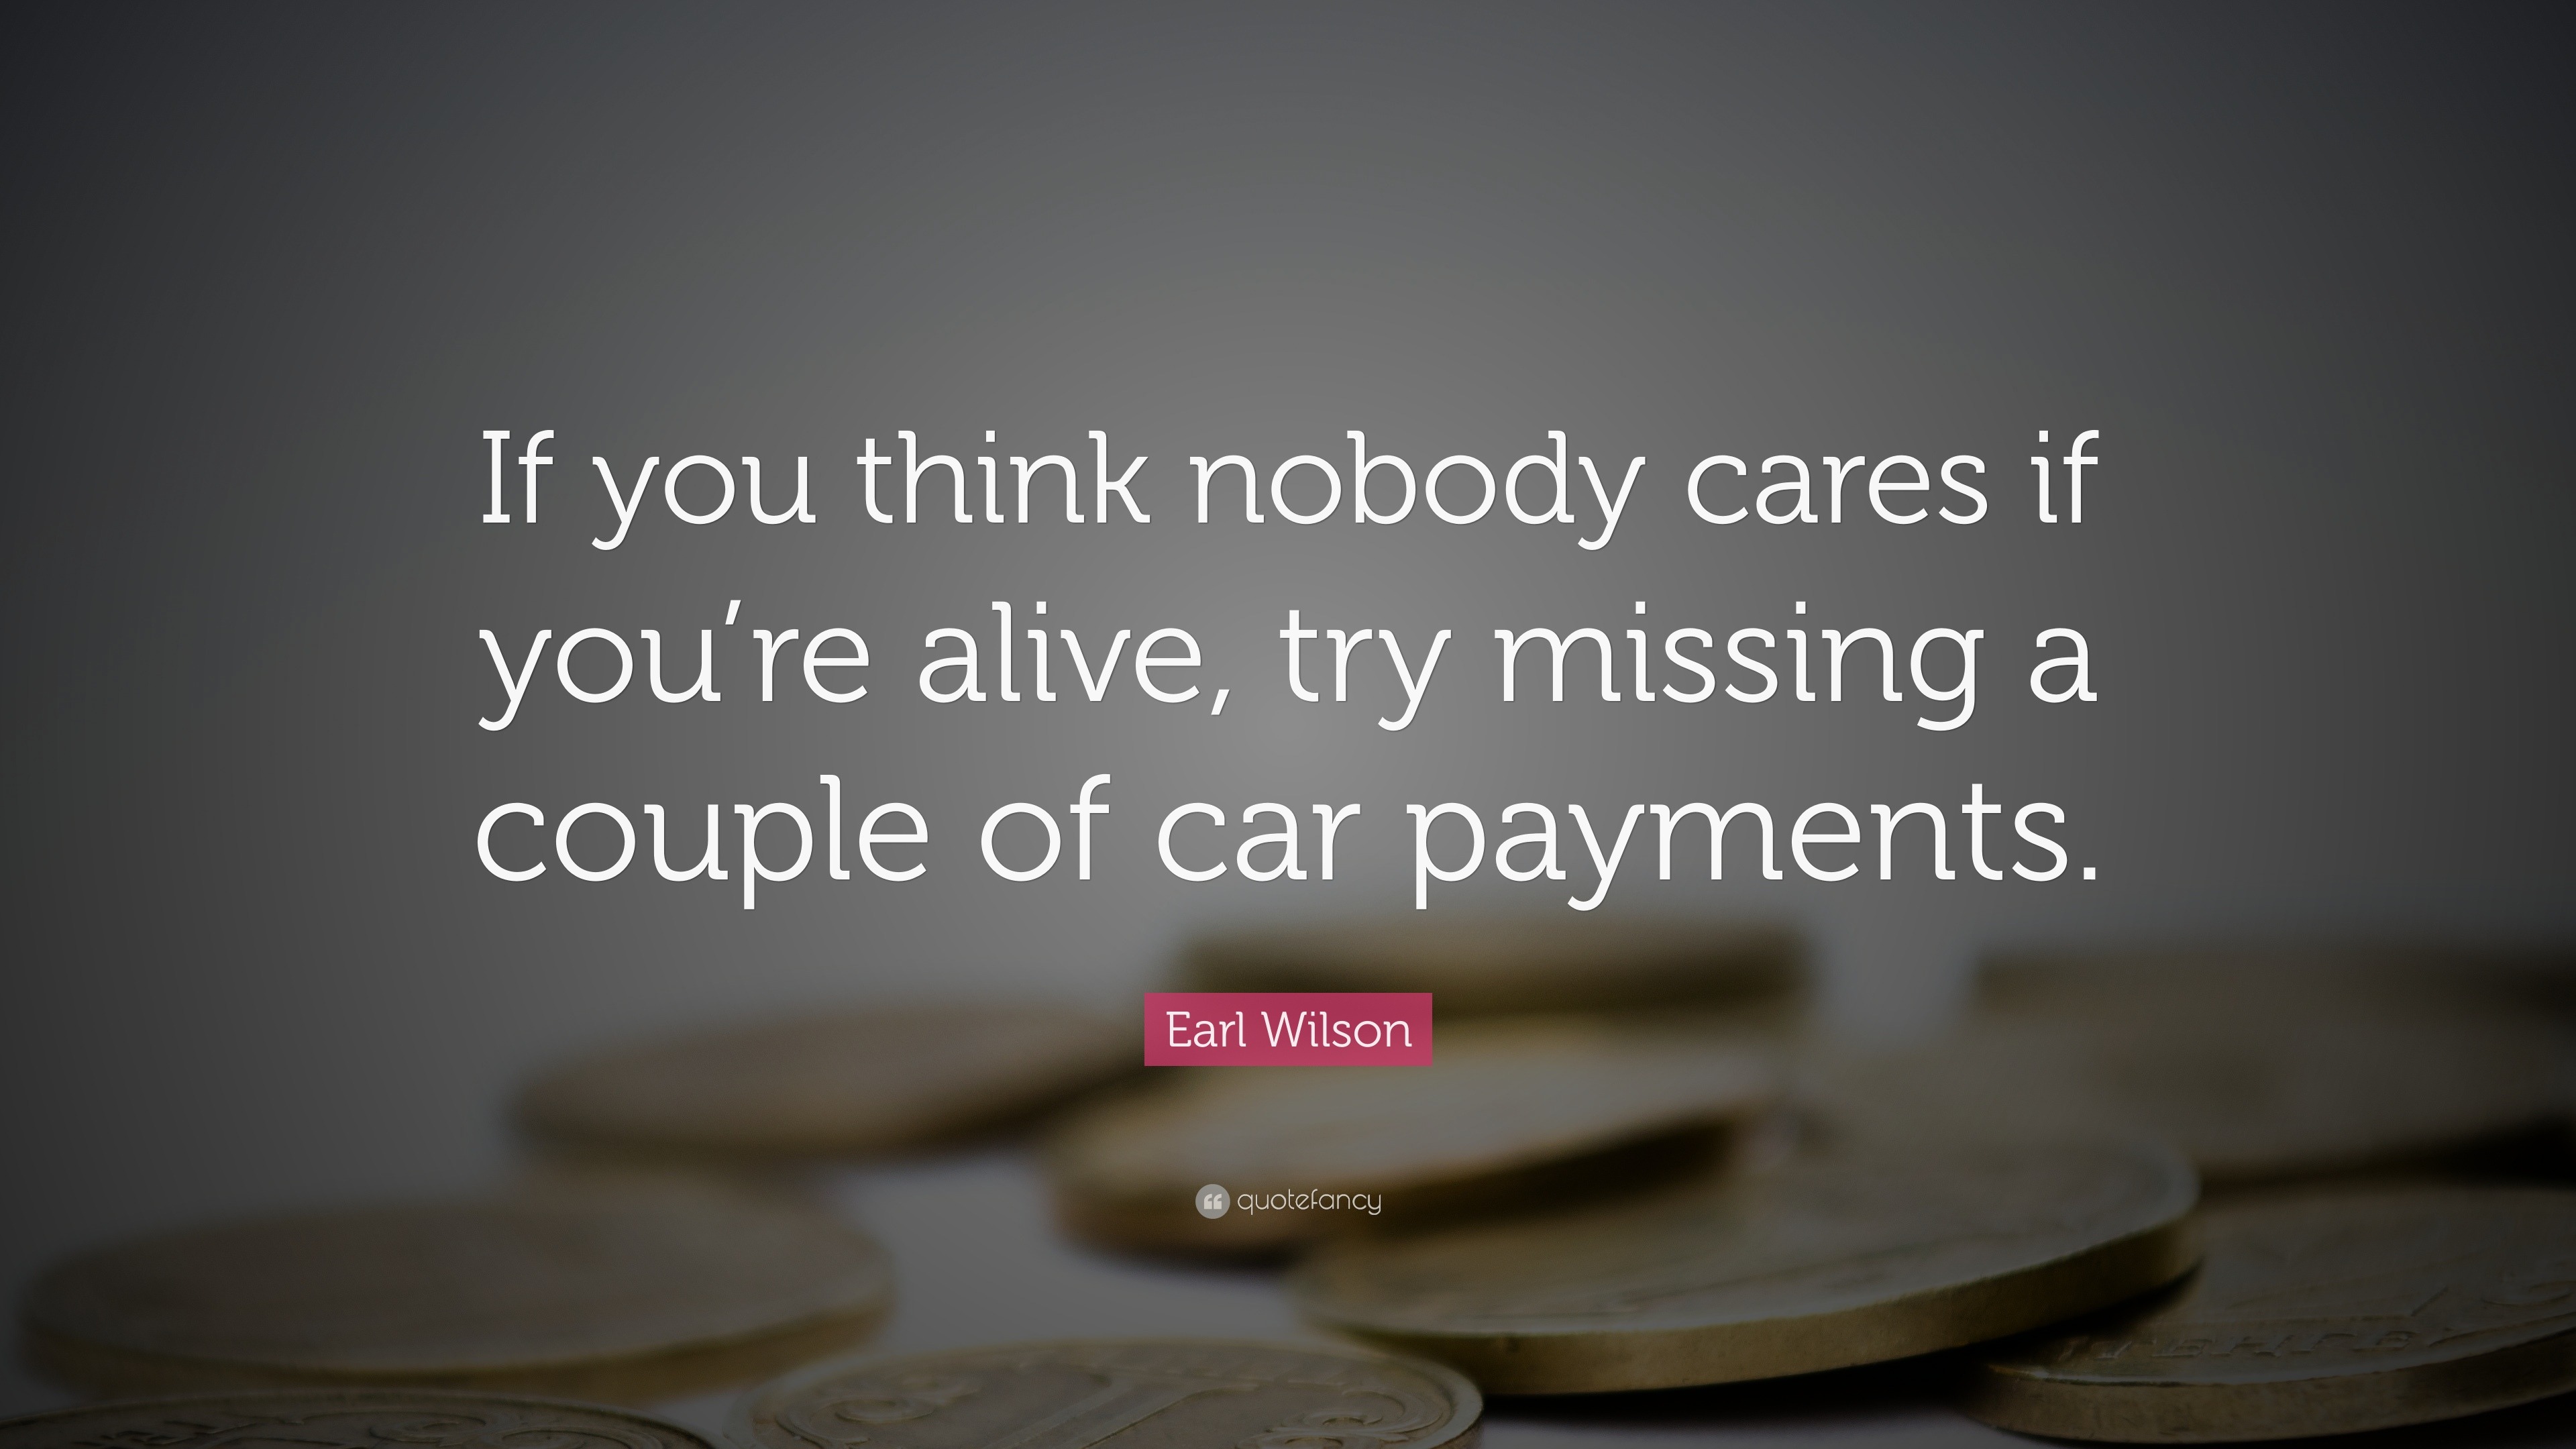 Earl Wilson Quote: “If you think nobody cares if you’re alive, try